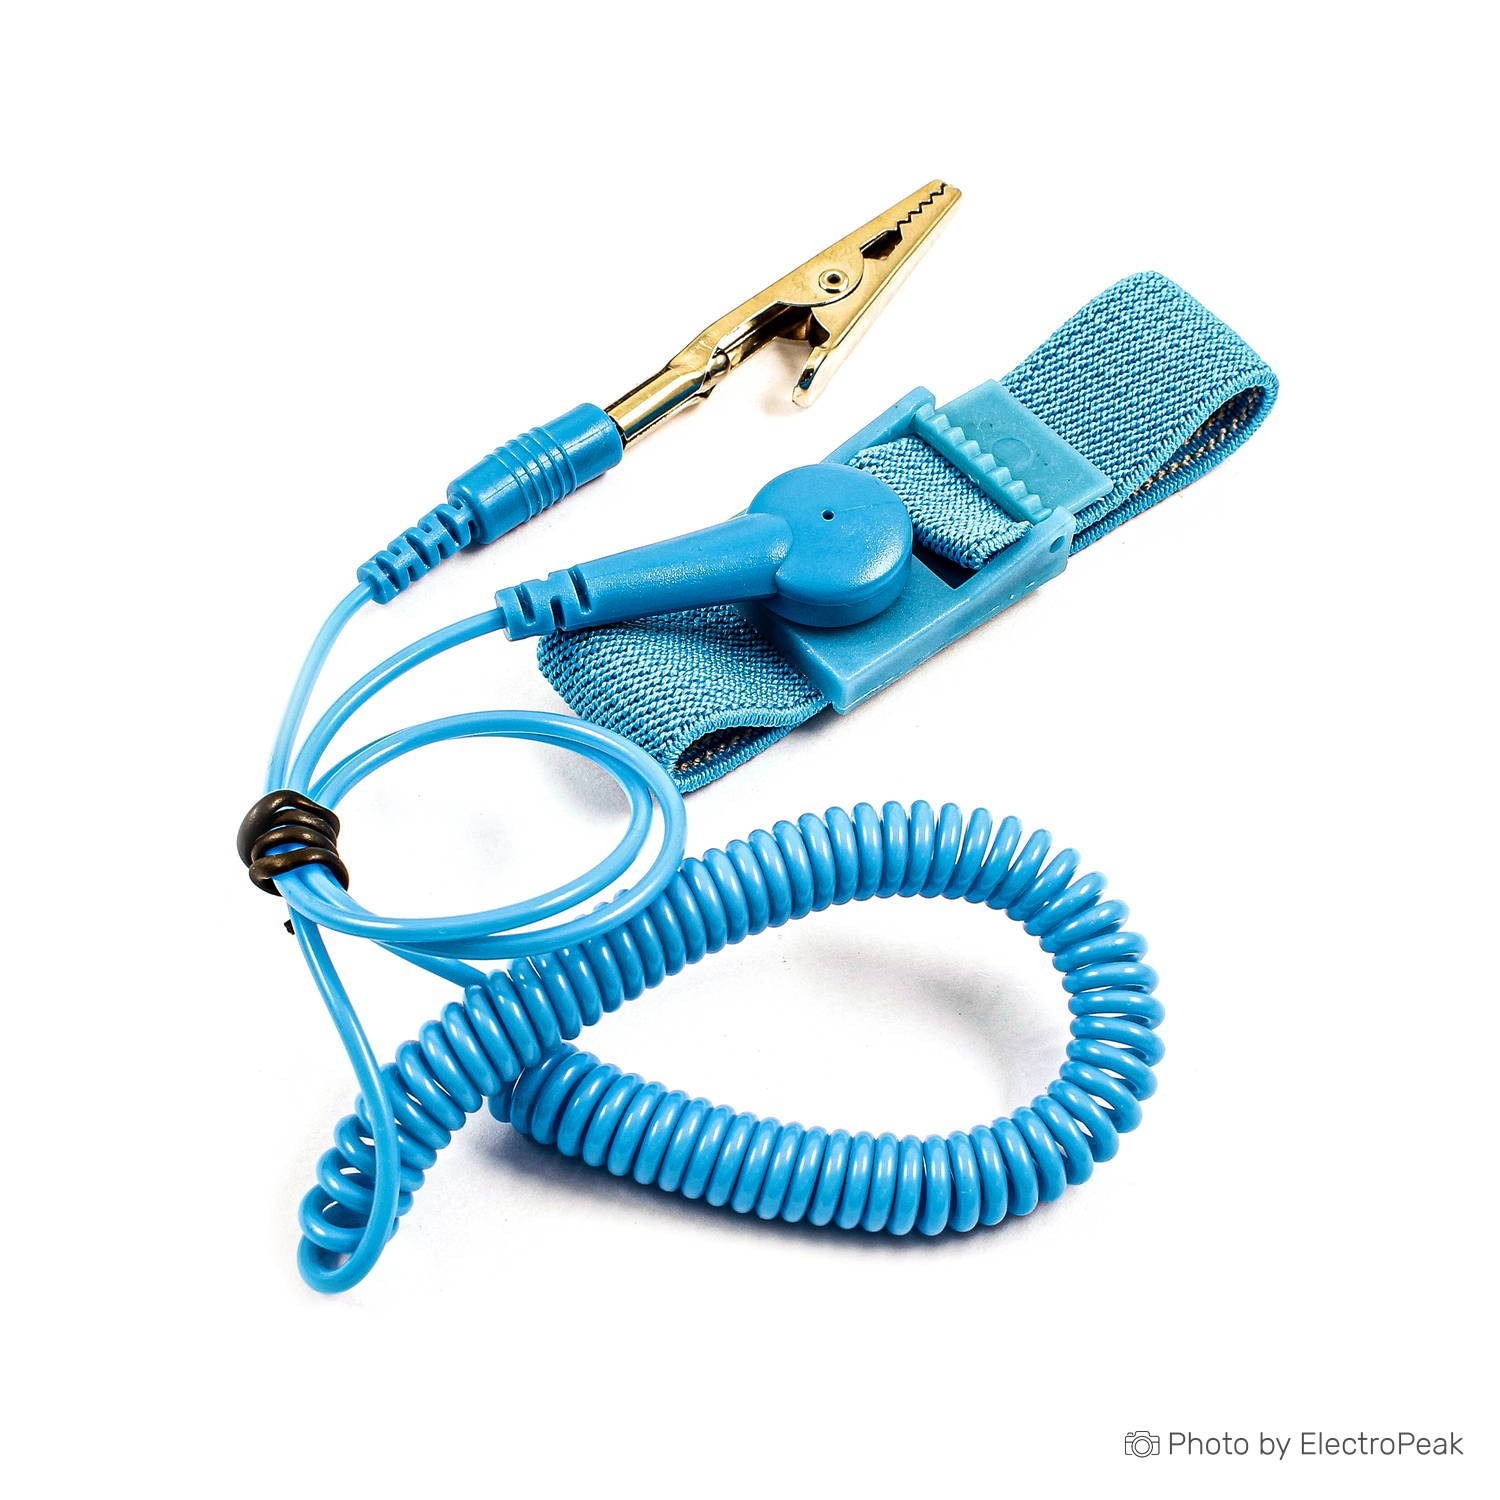 ESD Anti-static wrist Strap with Ground Cable - Screwdrivers